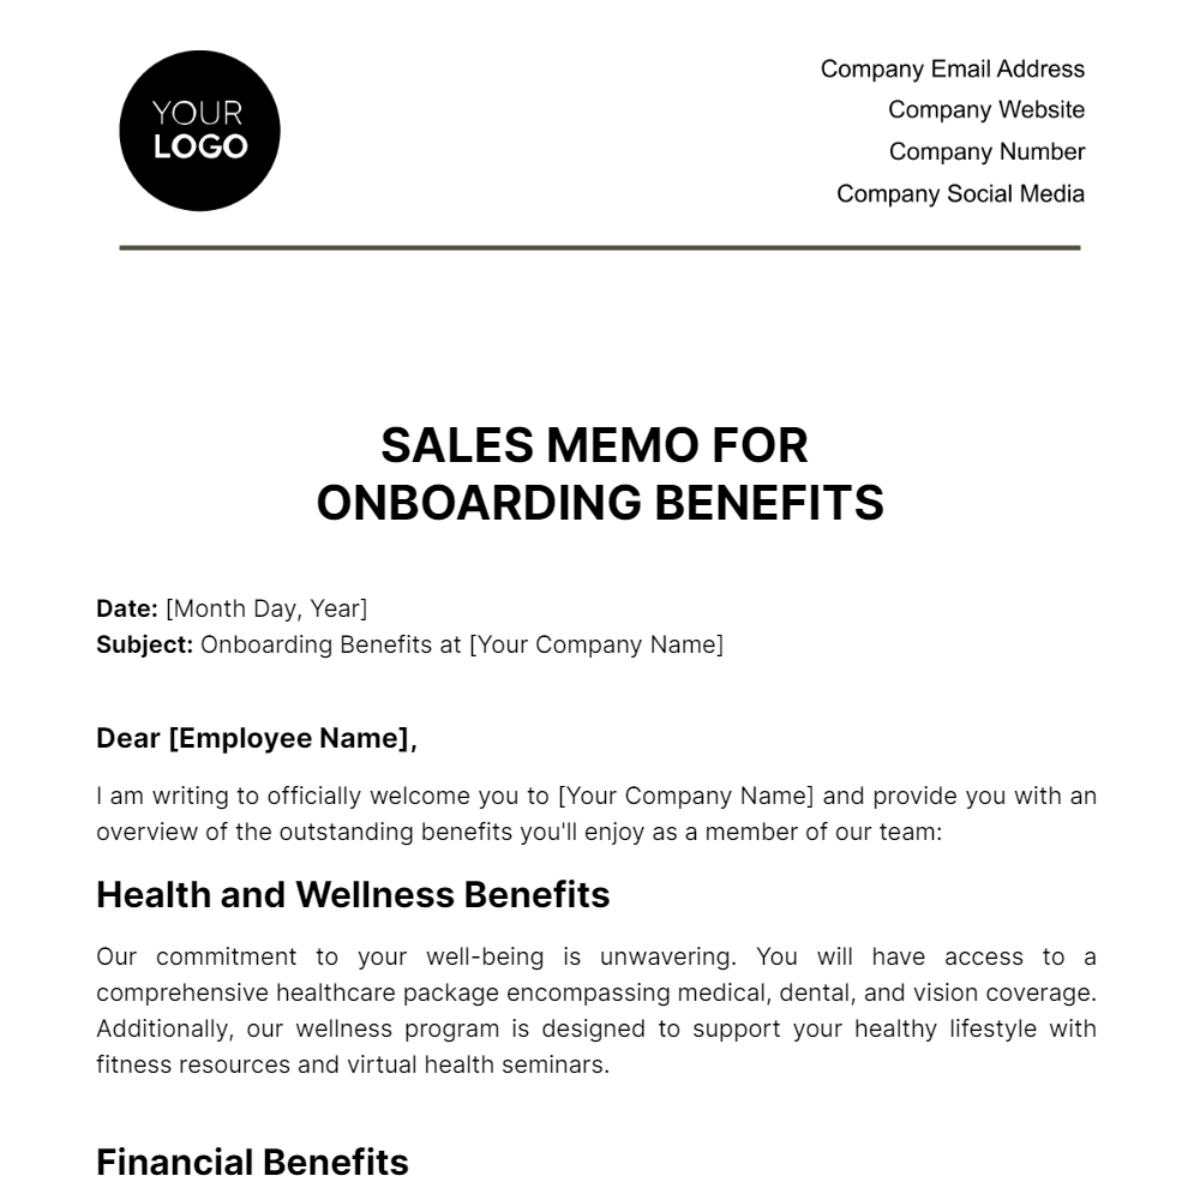 Sales Memo for Onboarding Benefits Template